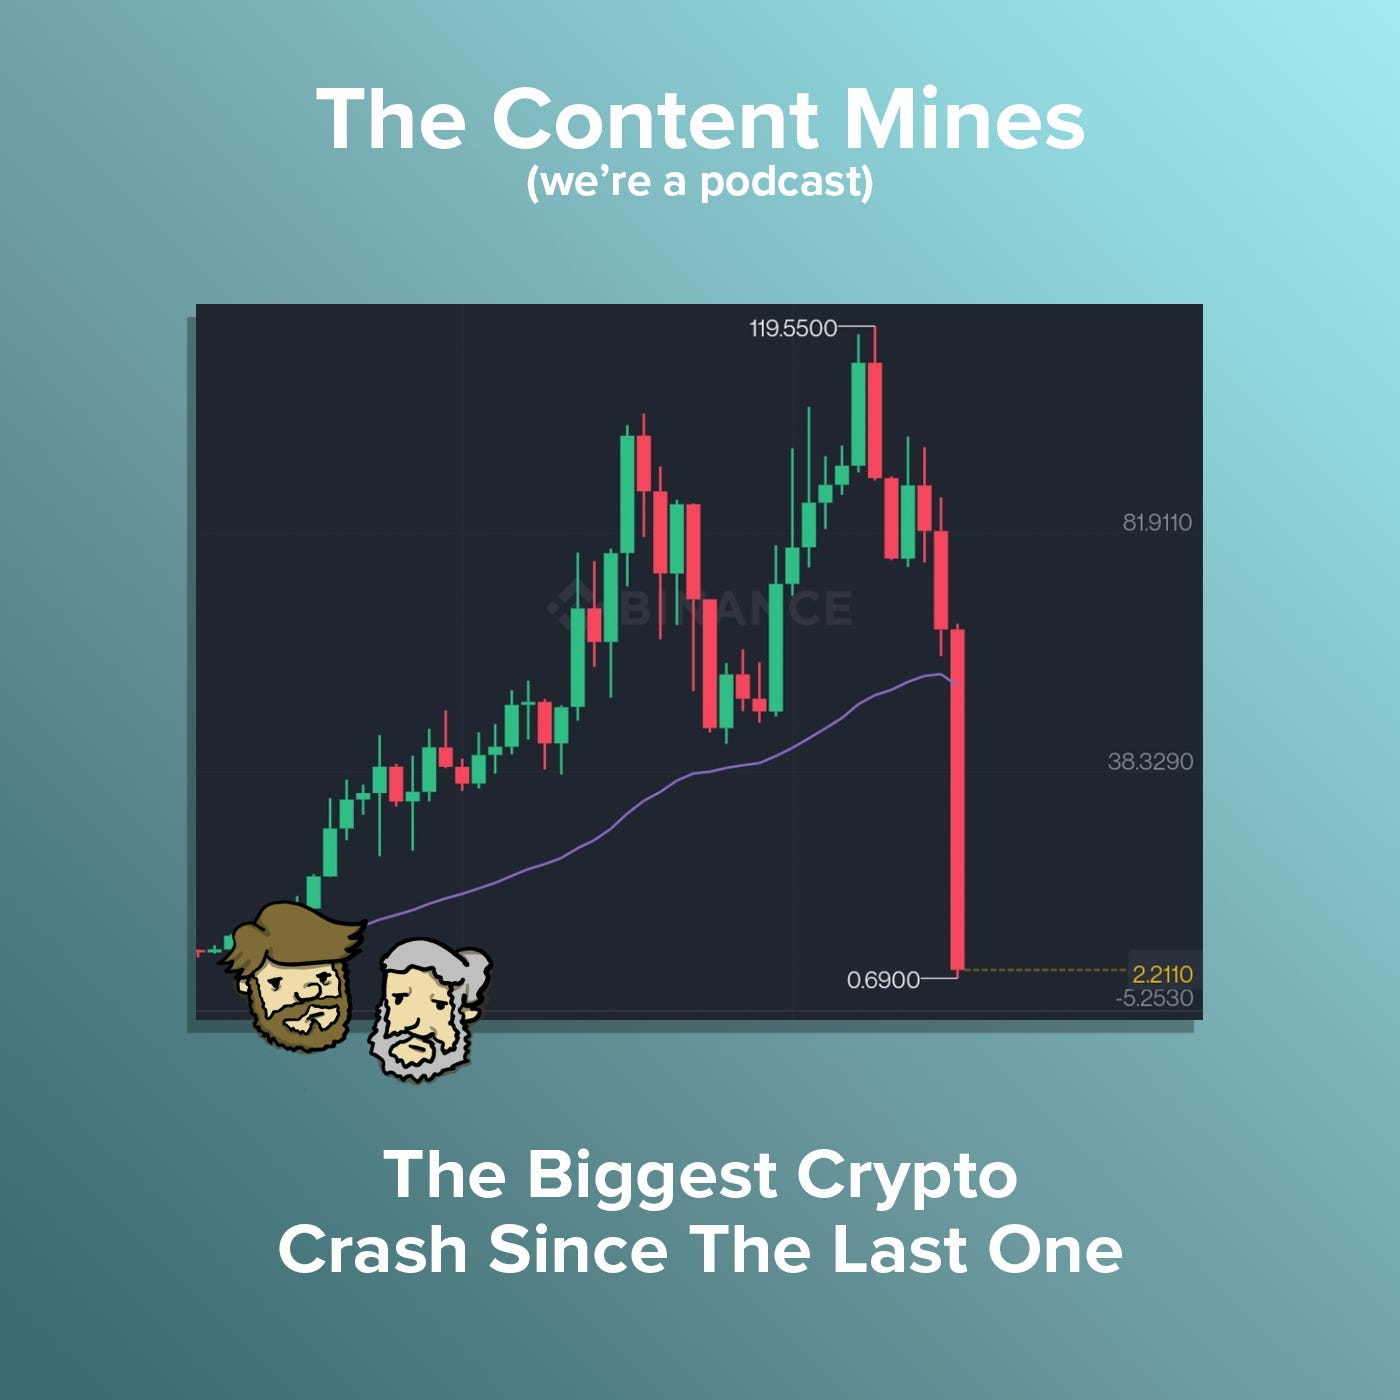 The Biggest Crypto Crash Since The Last One